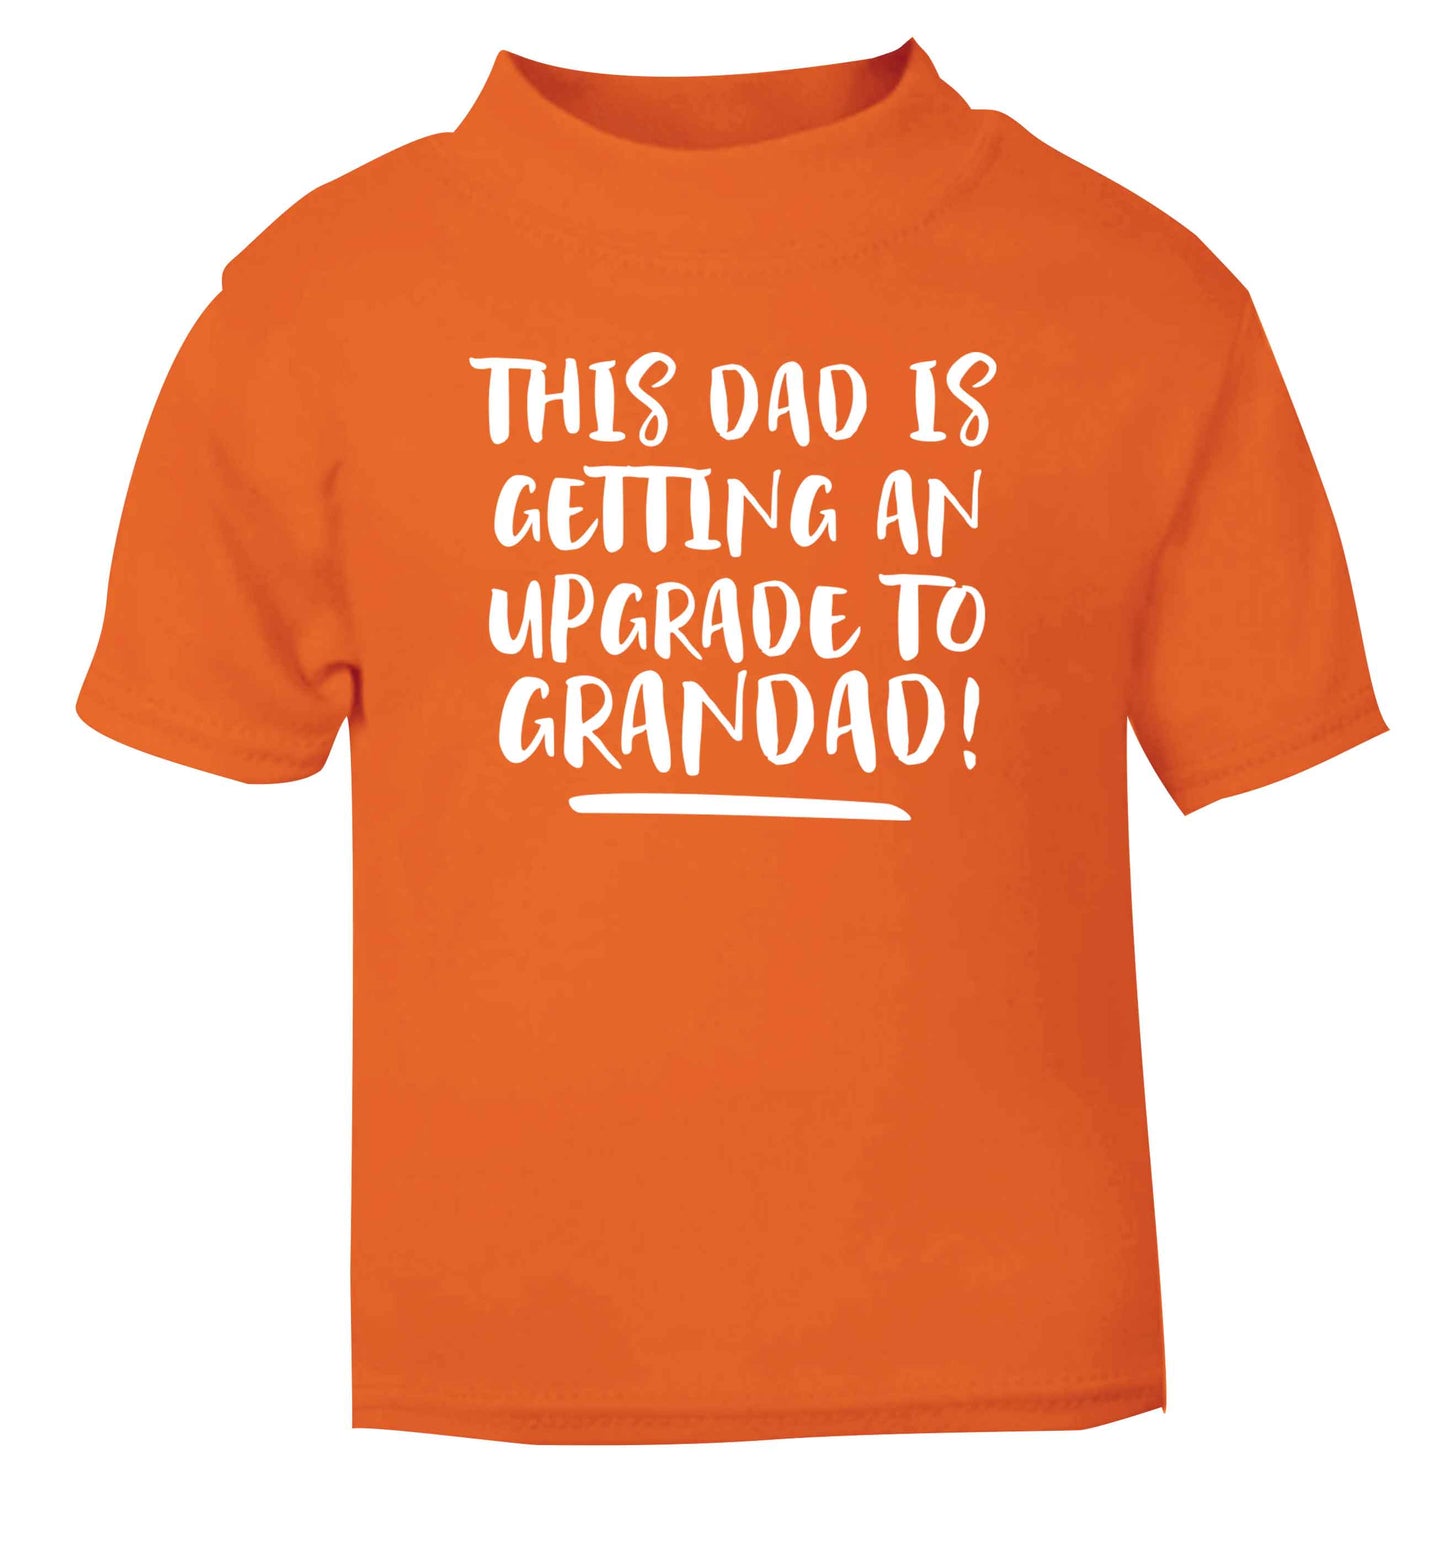 This dad is getting an upgrade to grandad! orange Baby Toddler Tshirt 2 Years